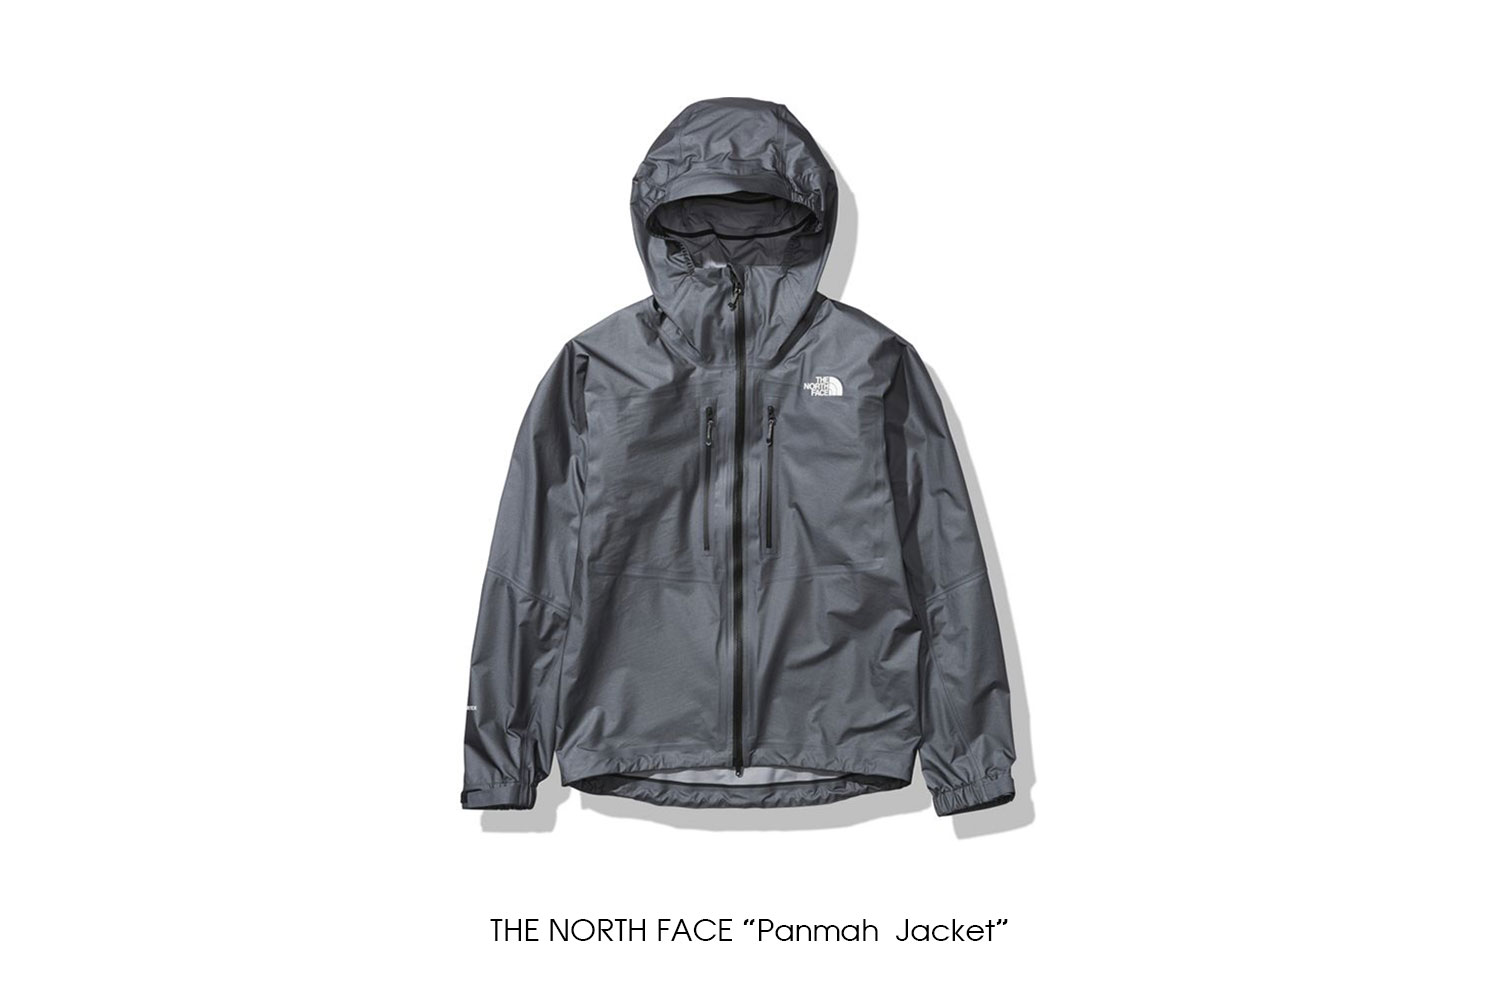 THE NORTH FACE "Panmah Jacket" 